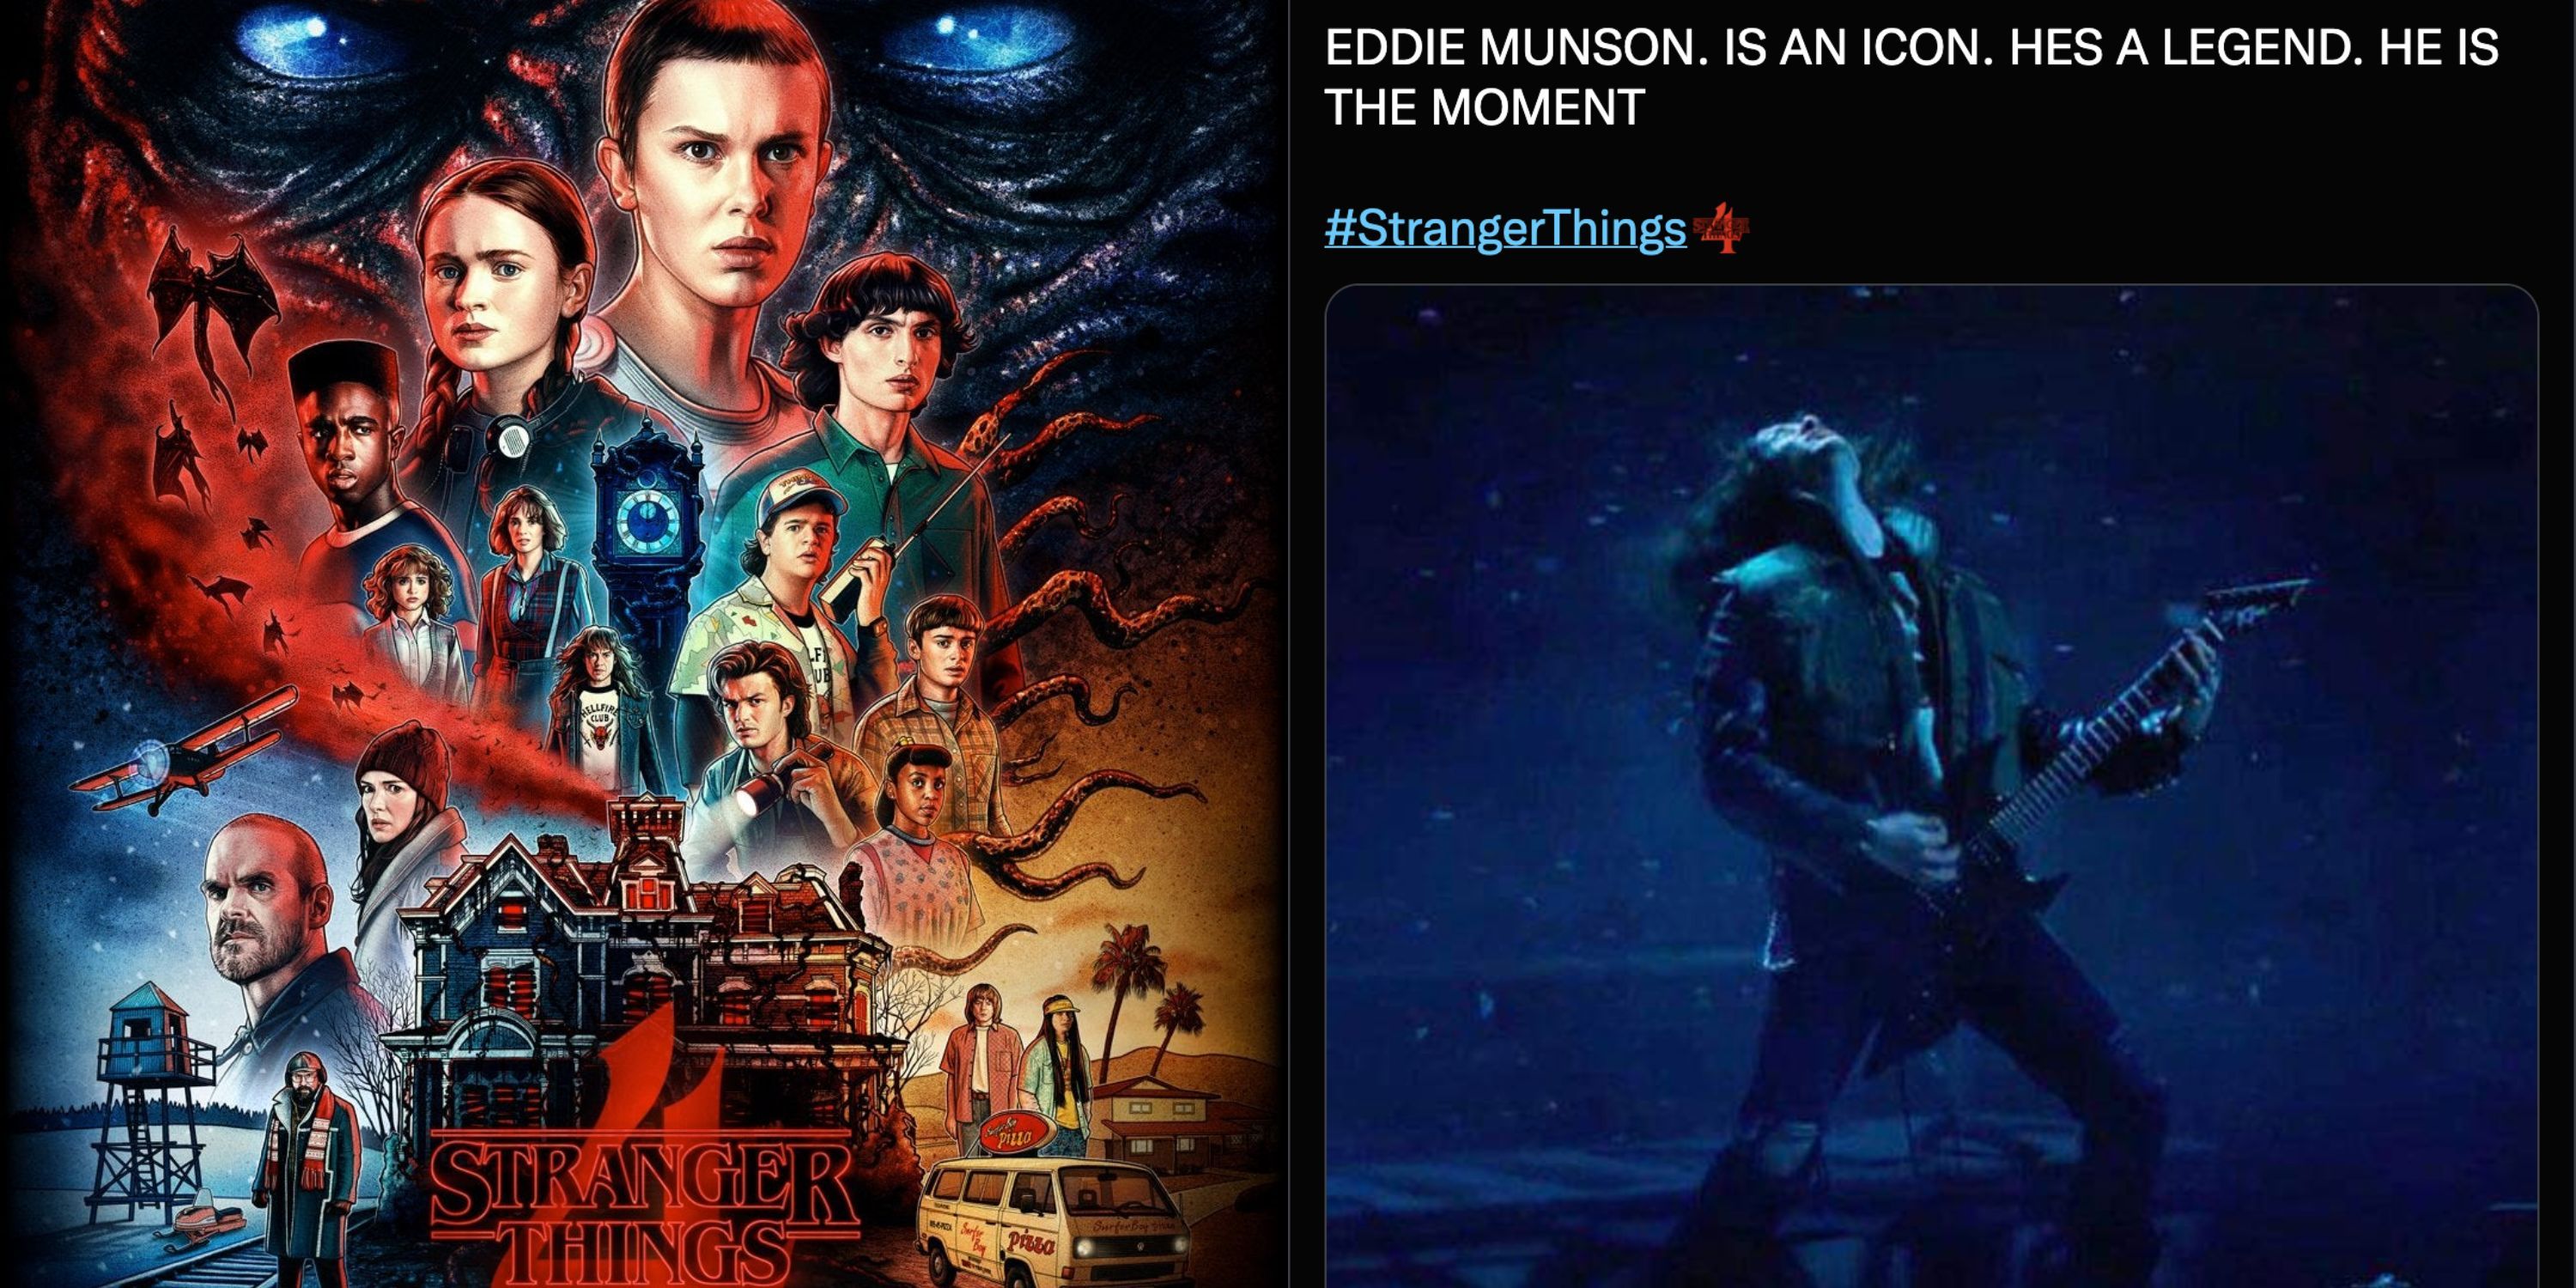 Split image of the poster for Stranger Things Season 4 and a tweet about the show